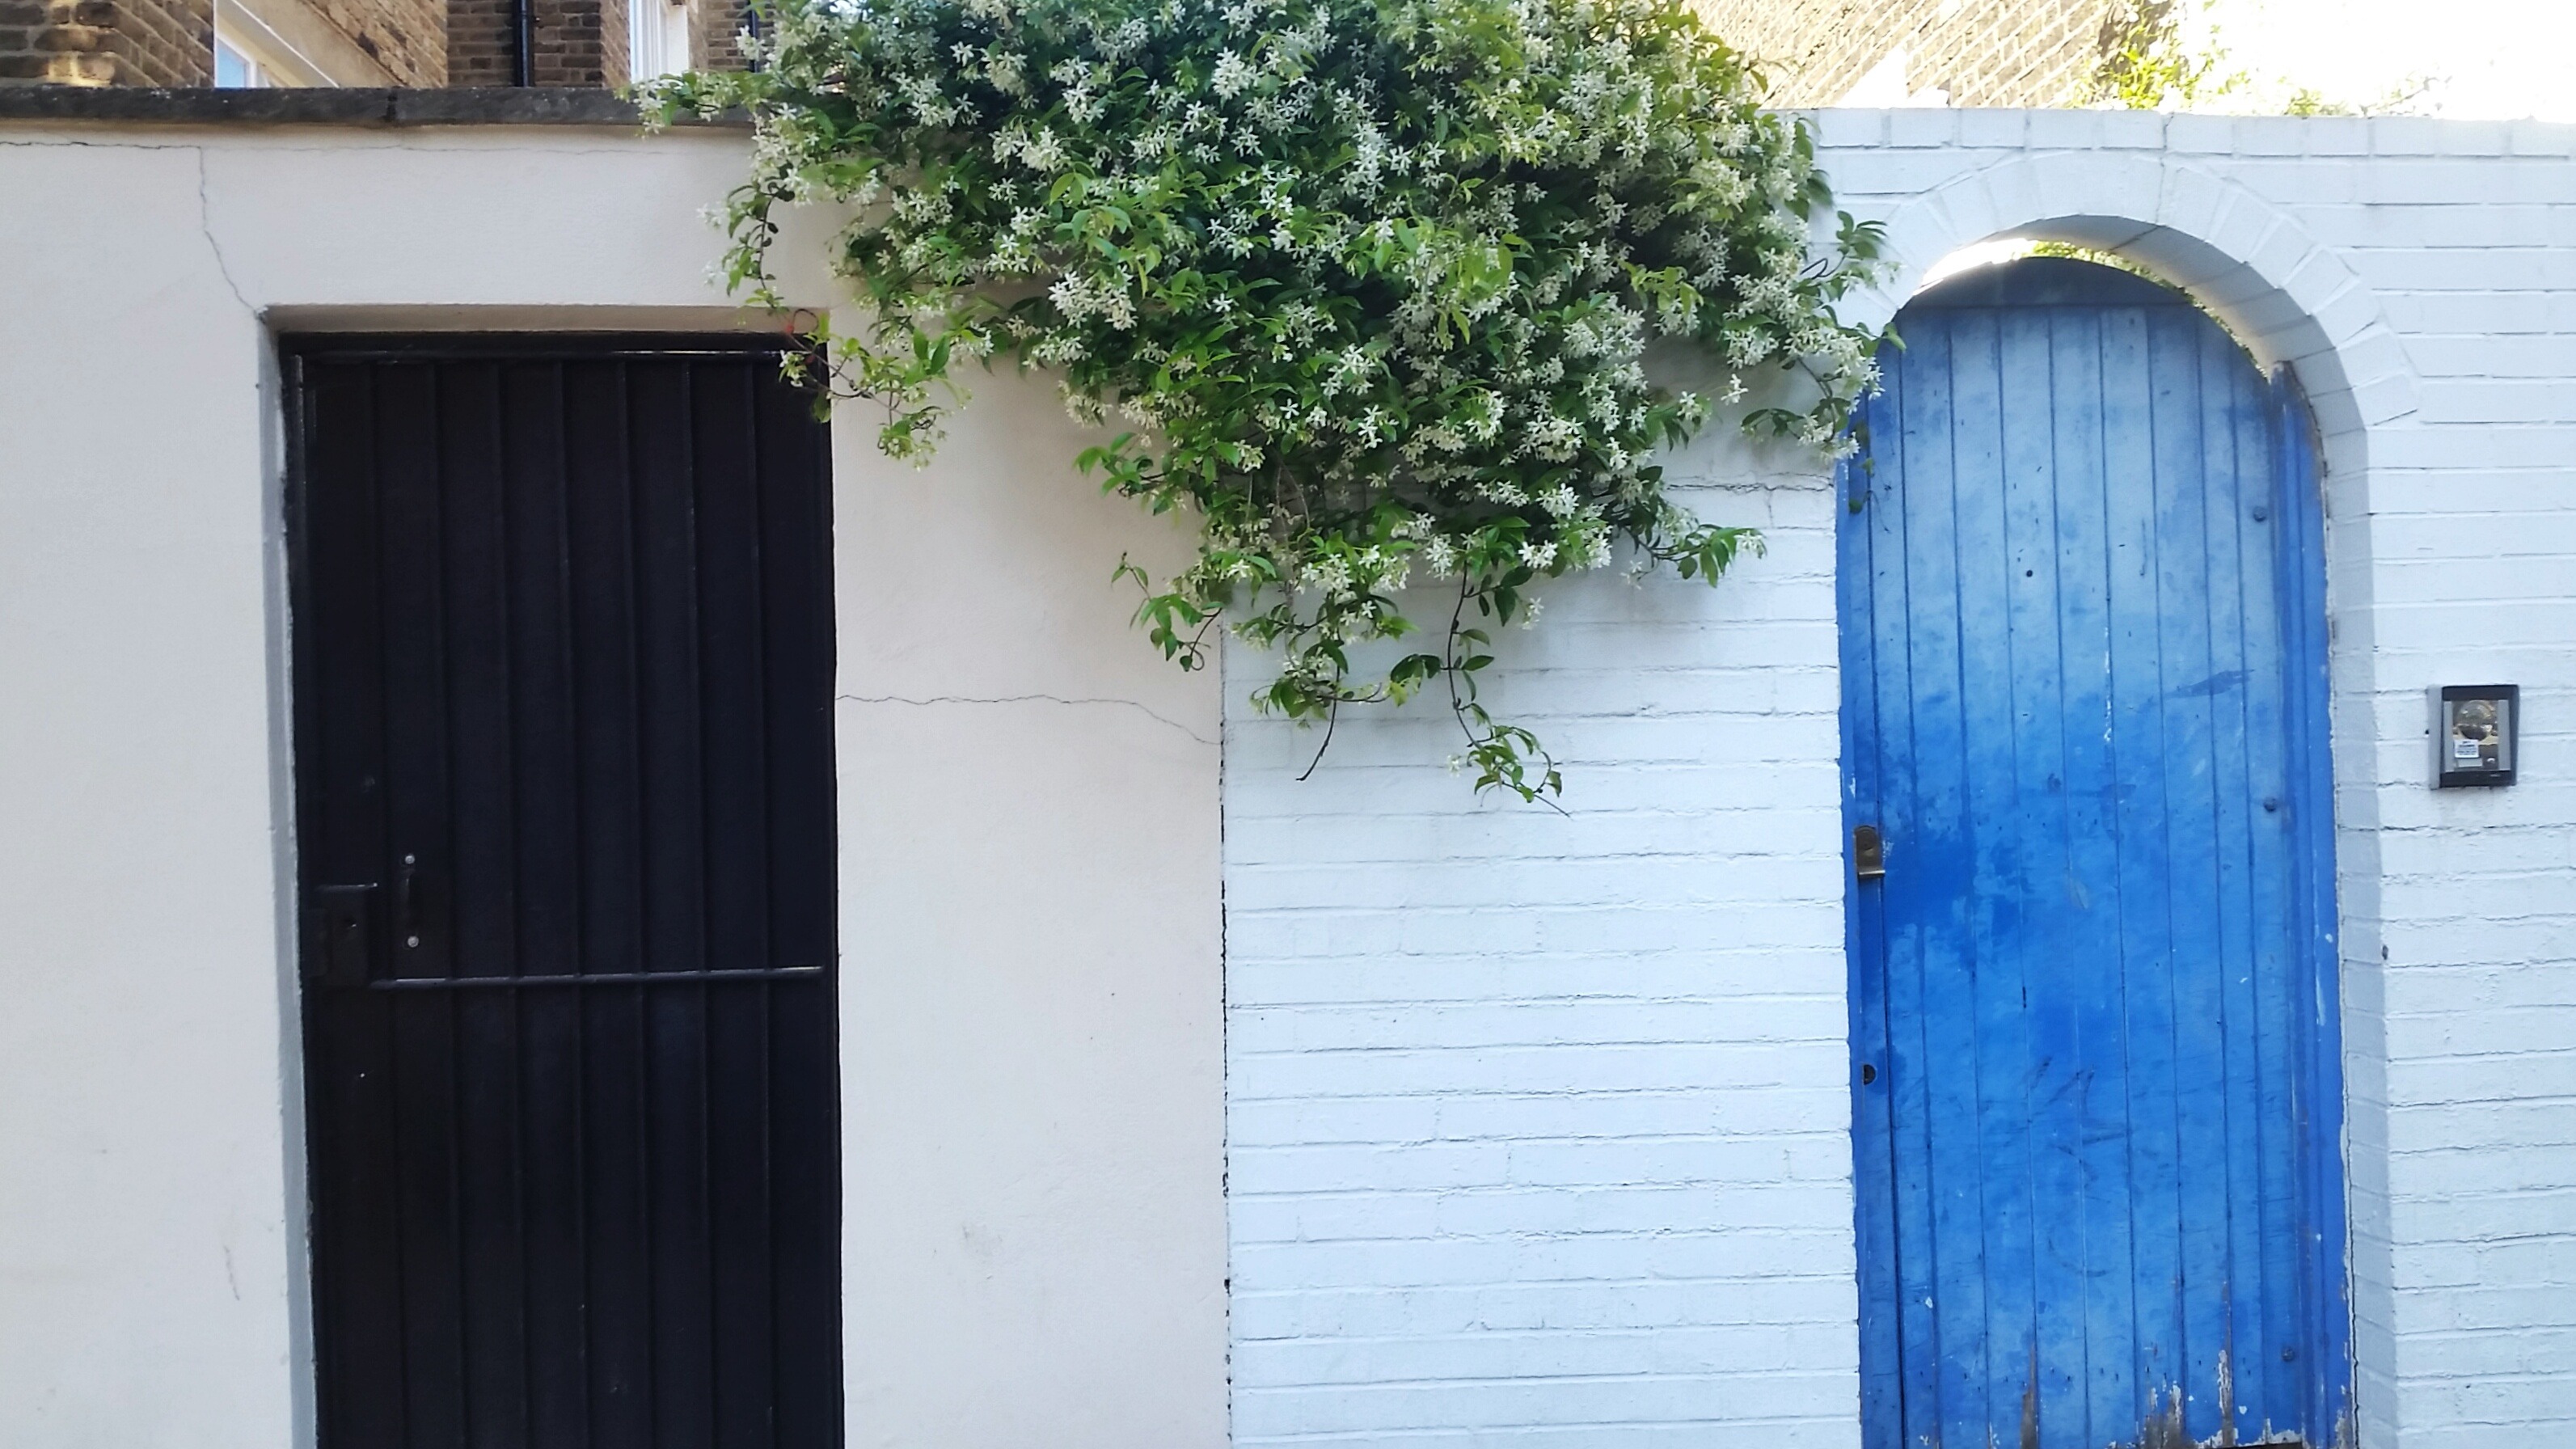 Notting Hill - 20 Reasons To Travel To London In Your Twenties